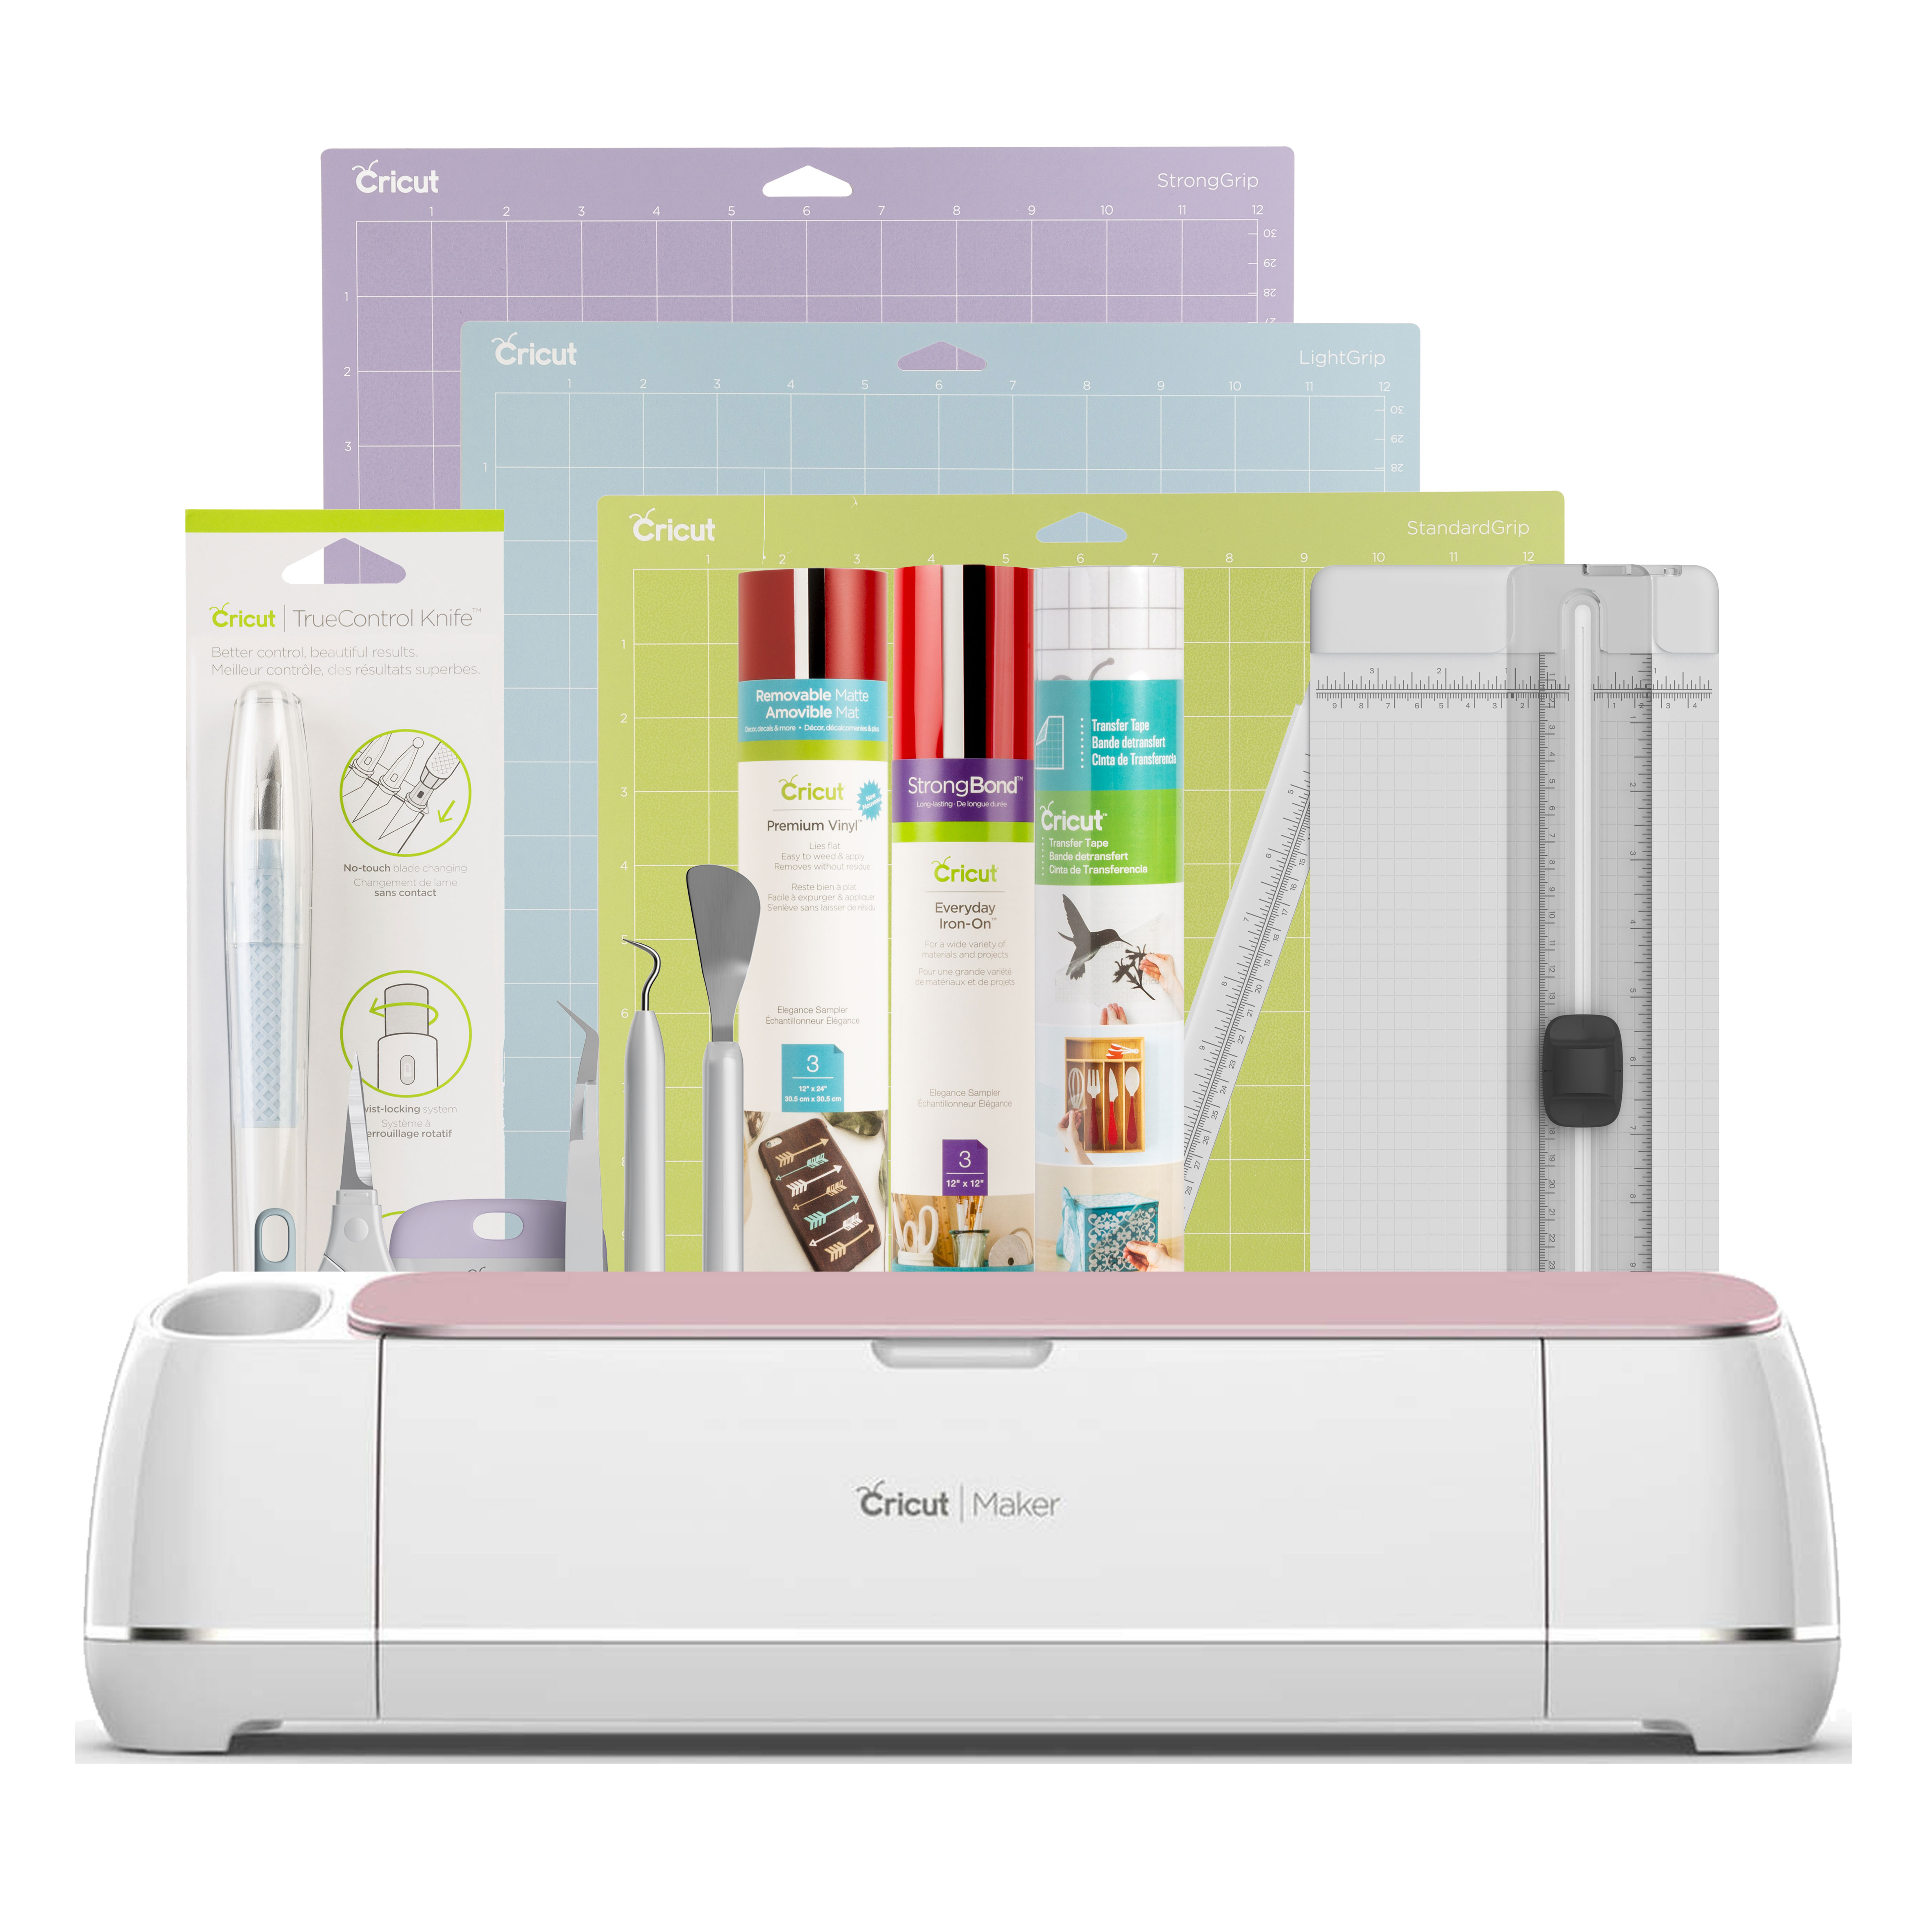  Cricut Maker - Smart Cutting Machine - With 10X Cutting Force,  Cuts 300+ Materials, Create 3D Art, Home Decor & More, Bluetooth  Connectivity, Compatible with iOS, Android, Windows & Mac, Mint